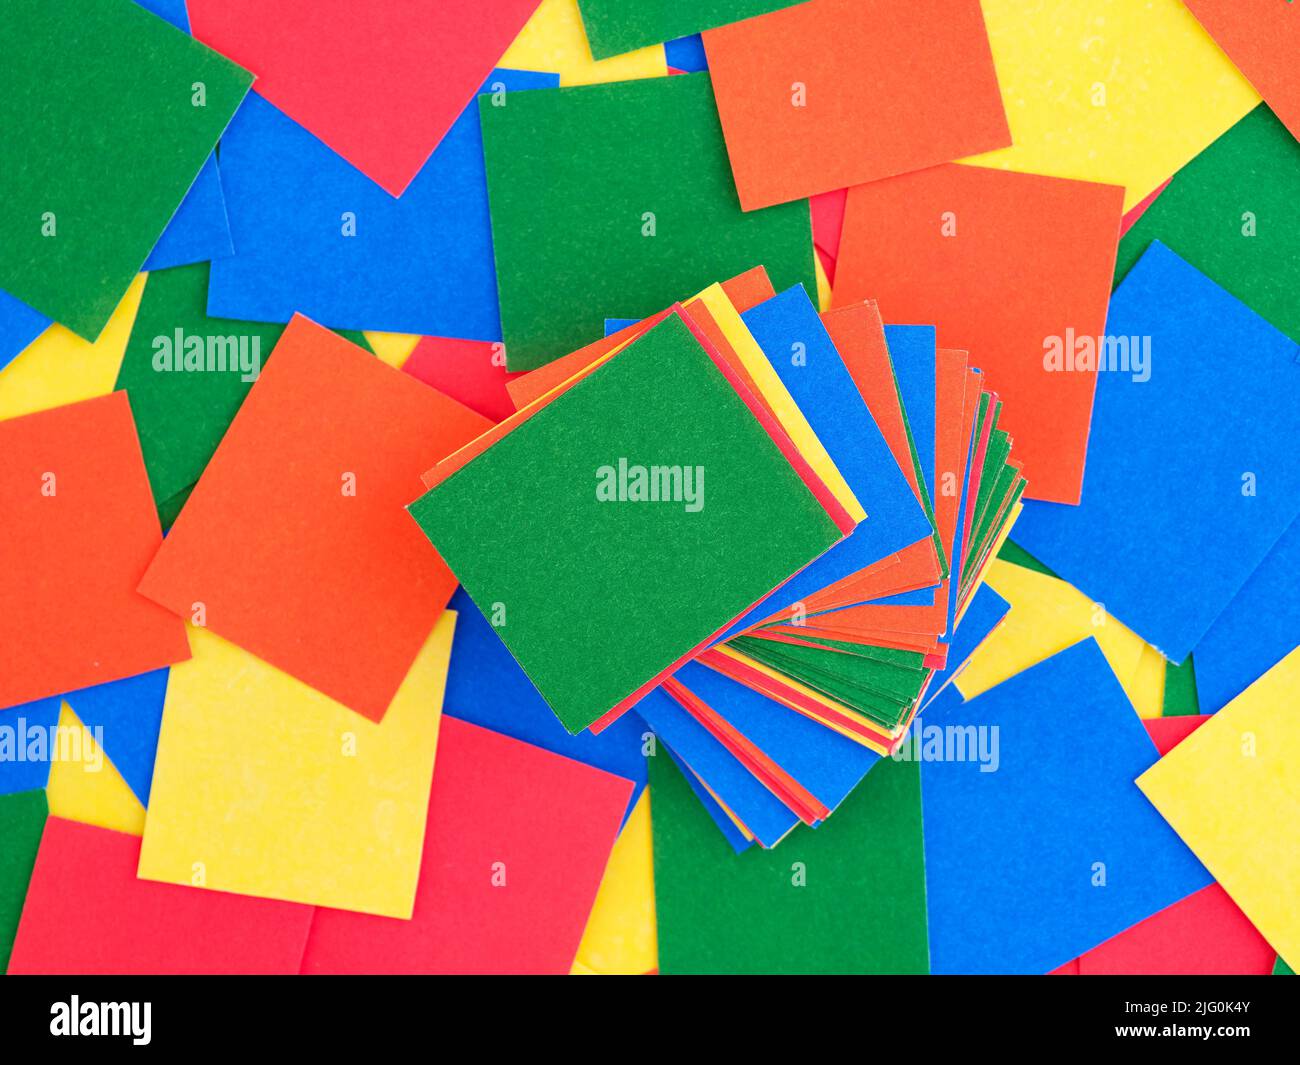 Multicolour pieces of paper in stack on a background of multicolour rectangular paper pieces. Full frame. Stock Photo